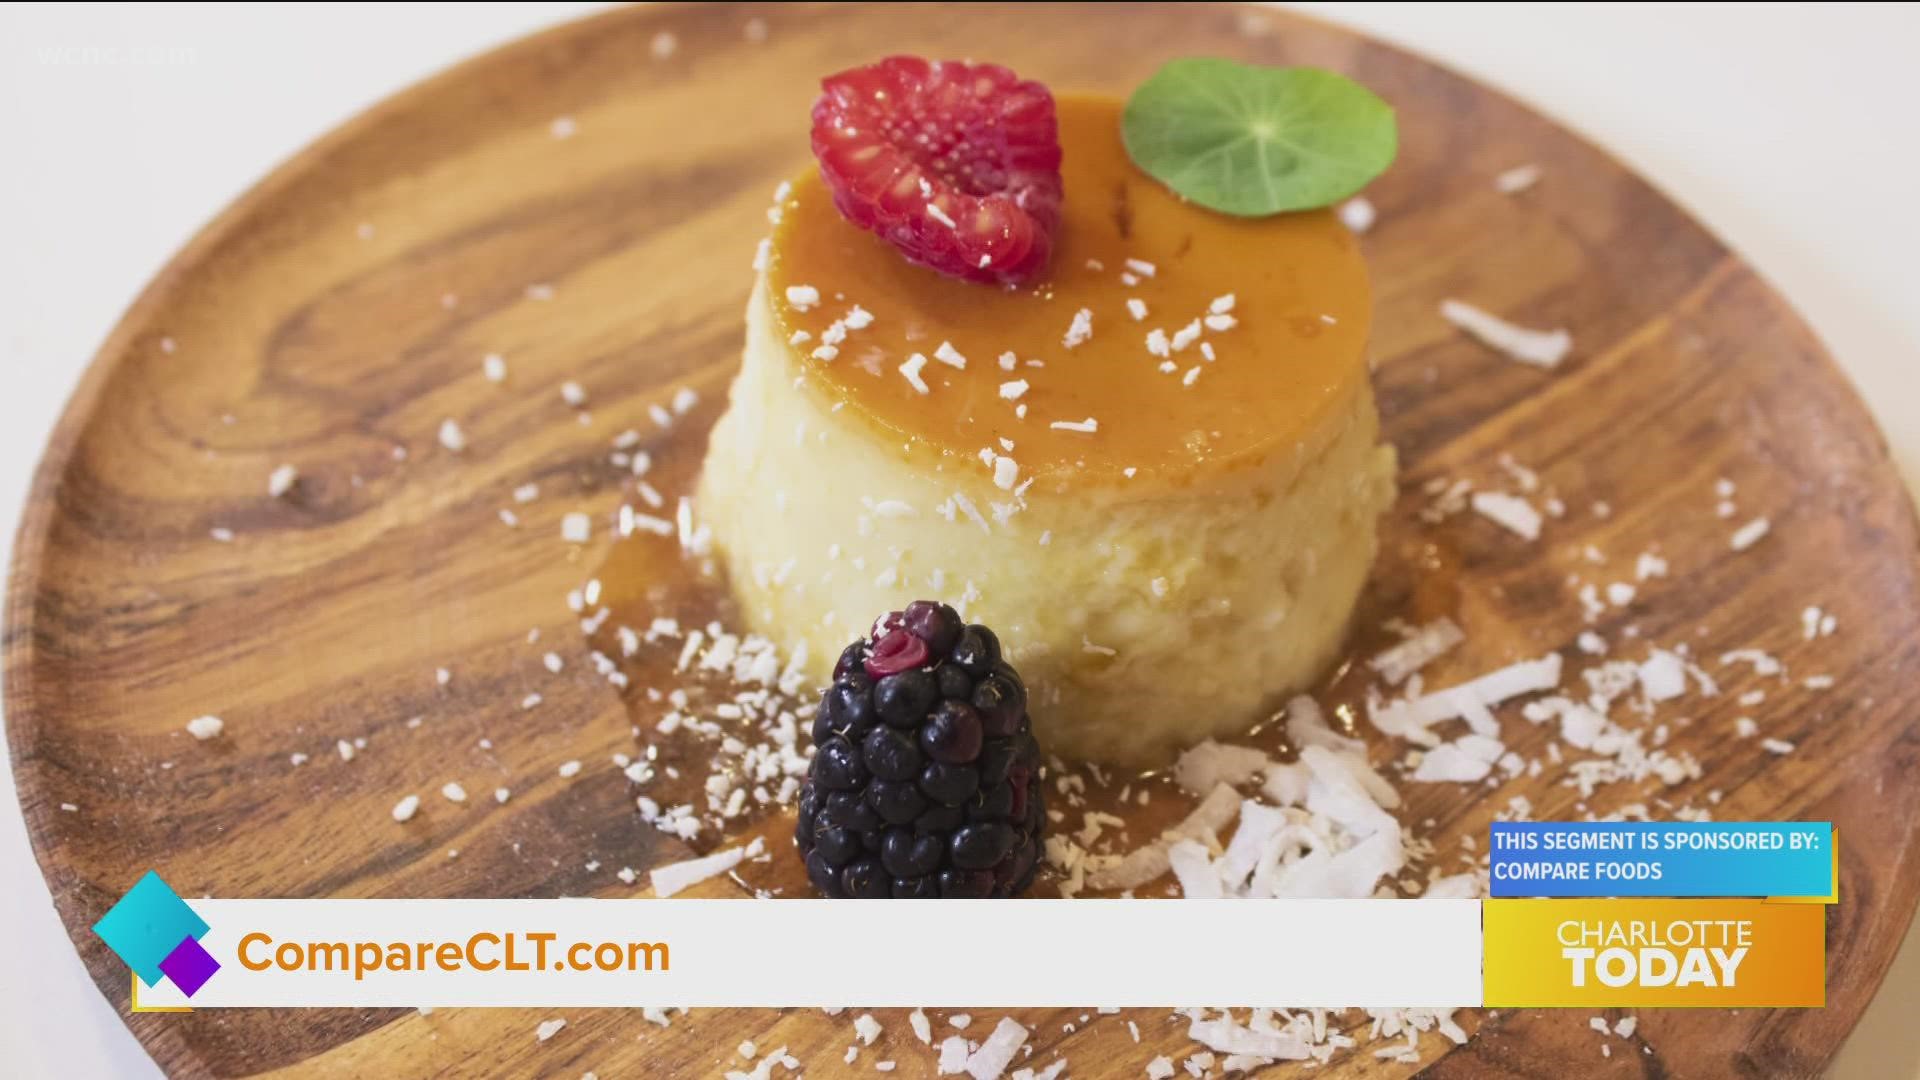 Coconut flan or fruity mango tiramisu will delight your dinner guests